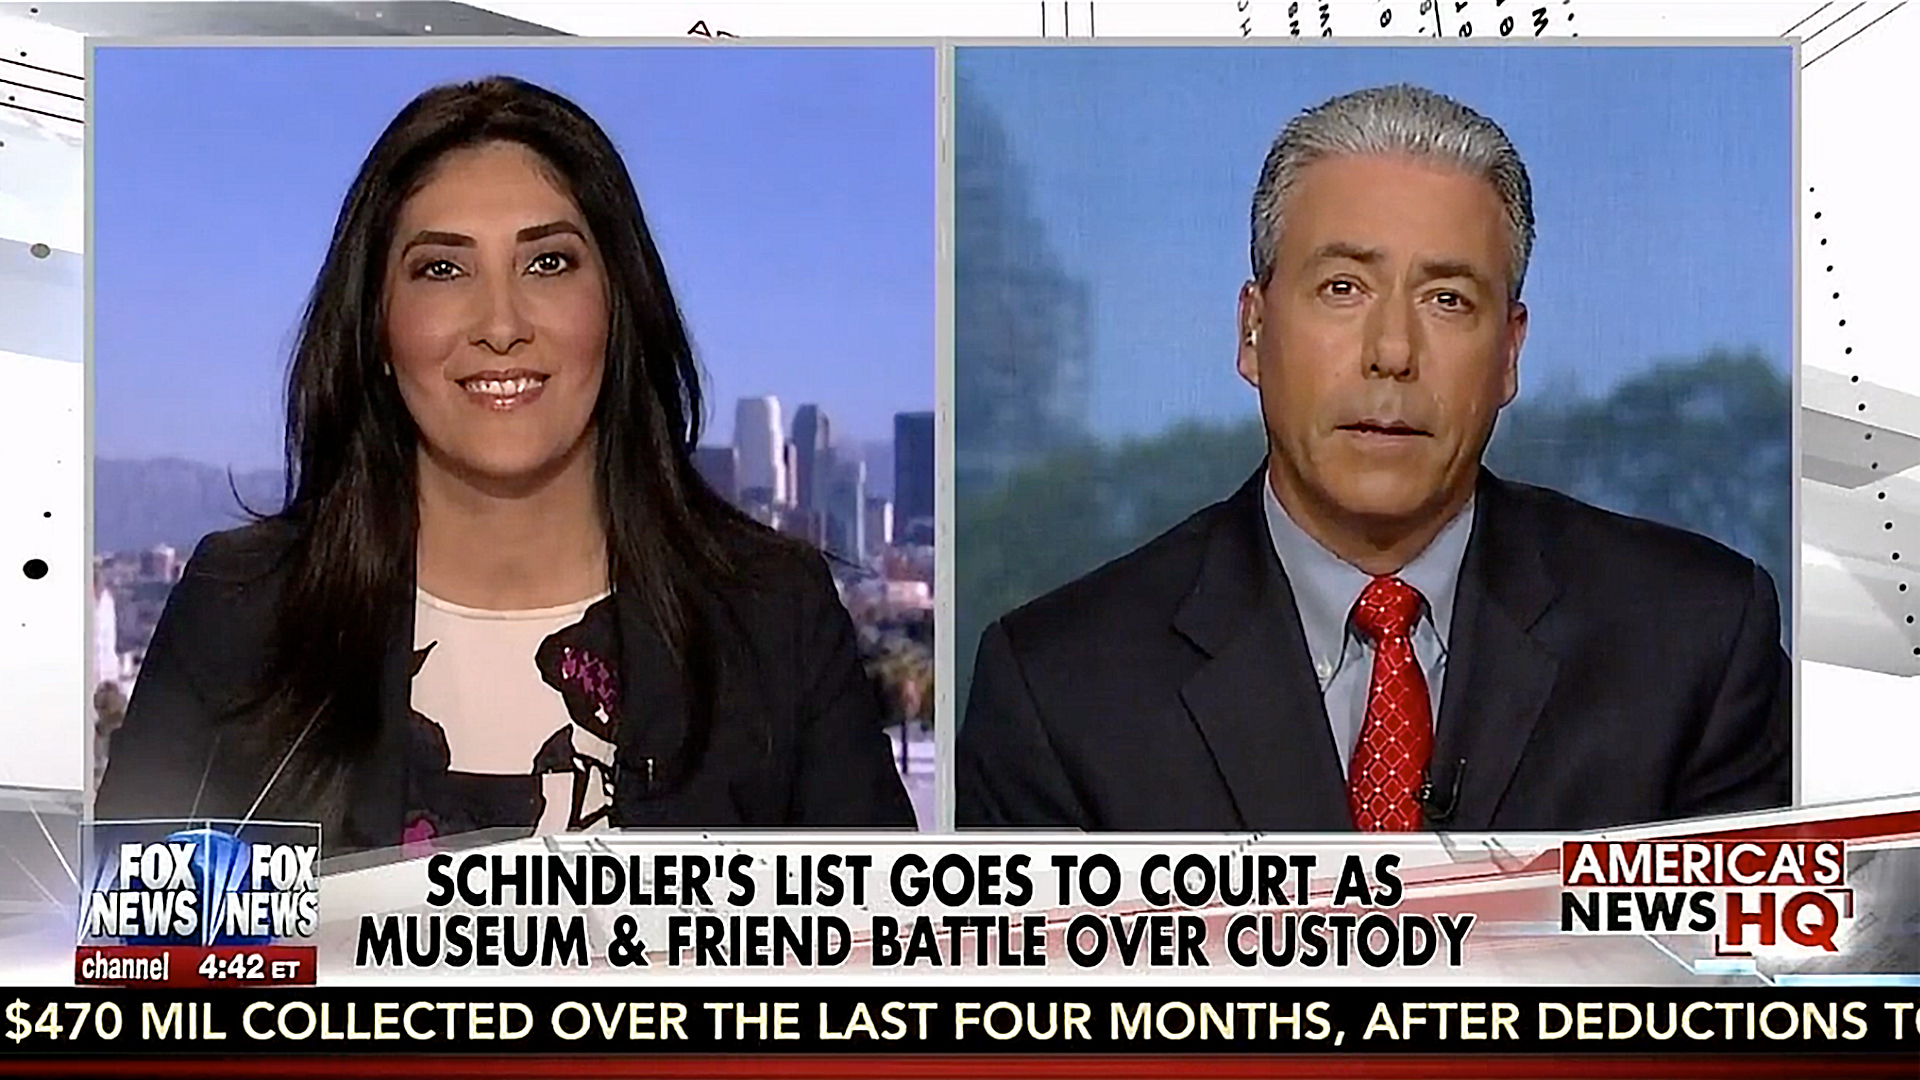 Fox News – America’s News HQ: Schindler’s List Goes To Court